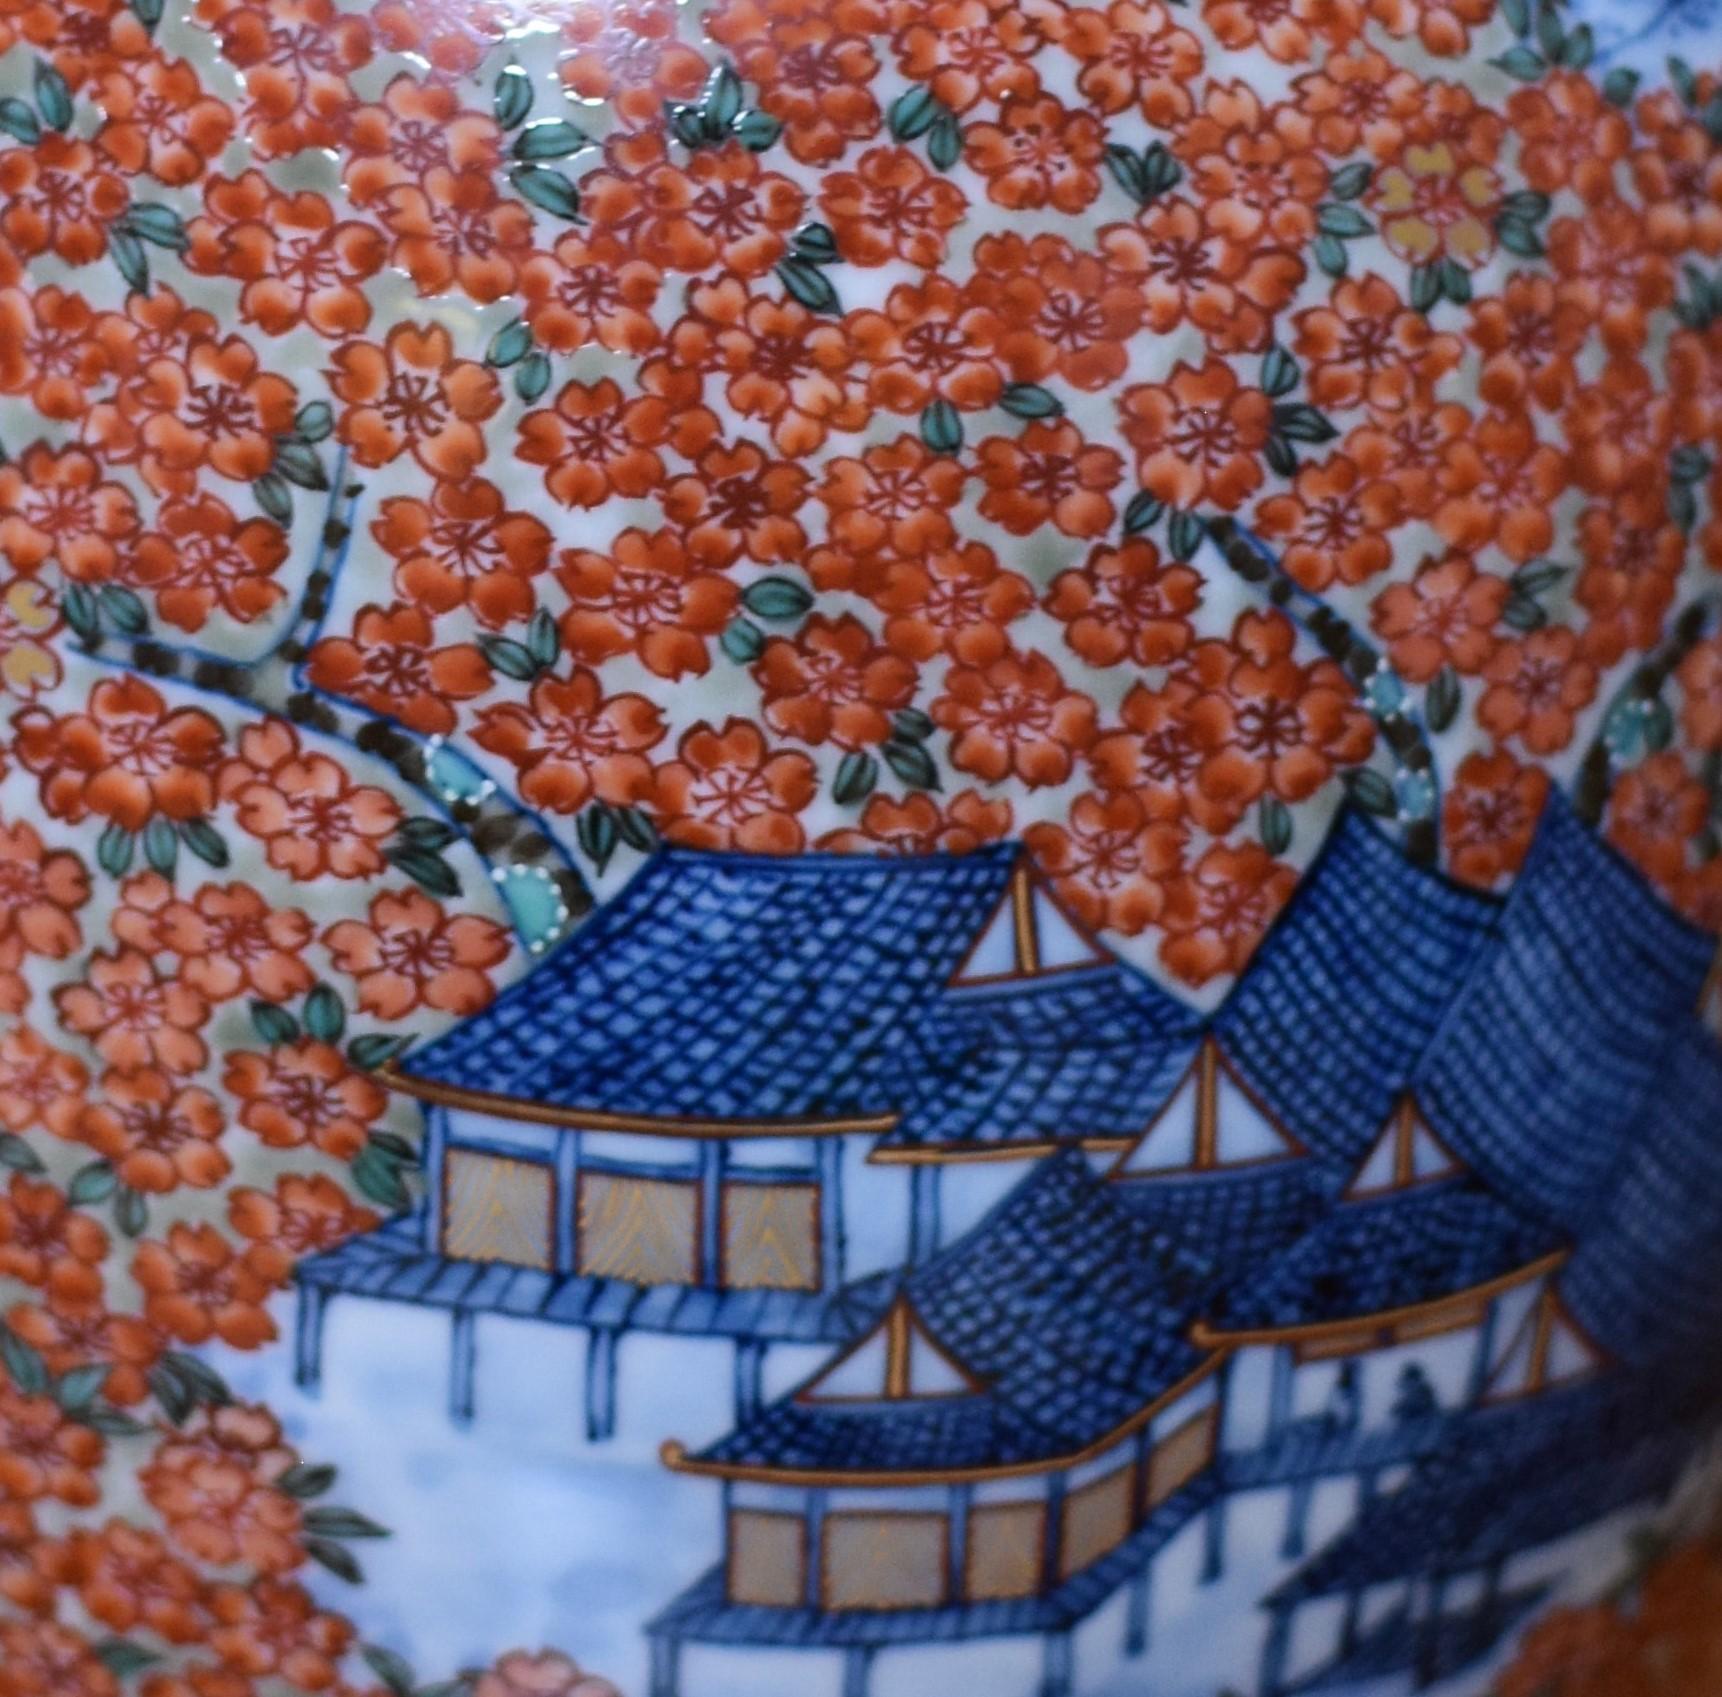 Extraordinary Japanese contemporary decorative porcelain vase, painstakingly intricately hand painted in blue and red on a stunningly shaped porcelain body, a signed masterpiece by highly acclaimed award-winning second-generation master porcelain